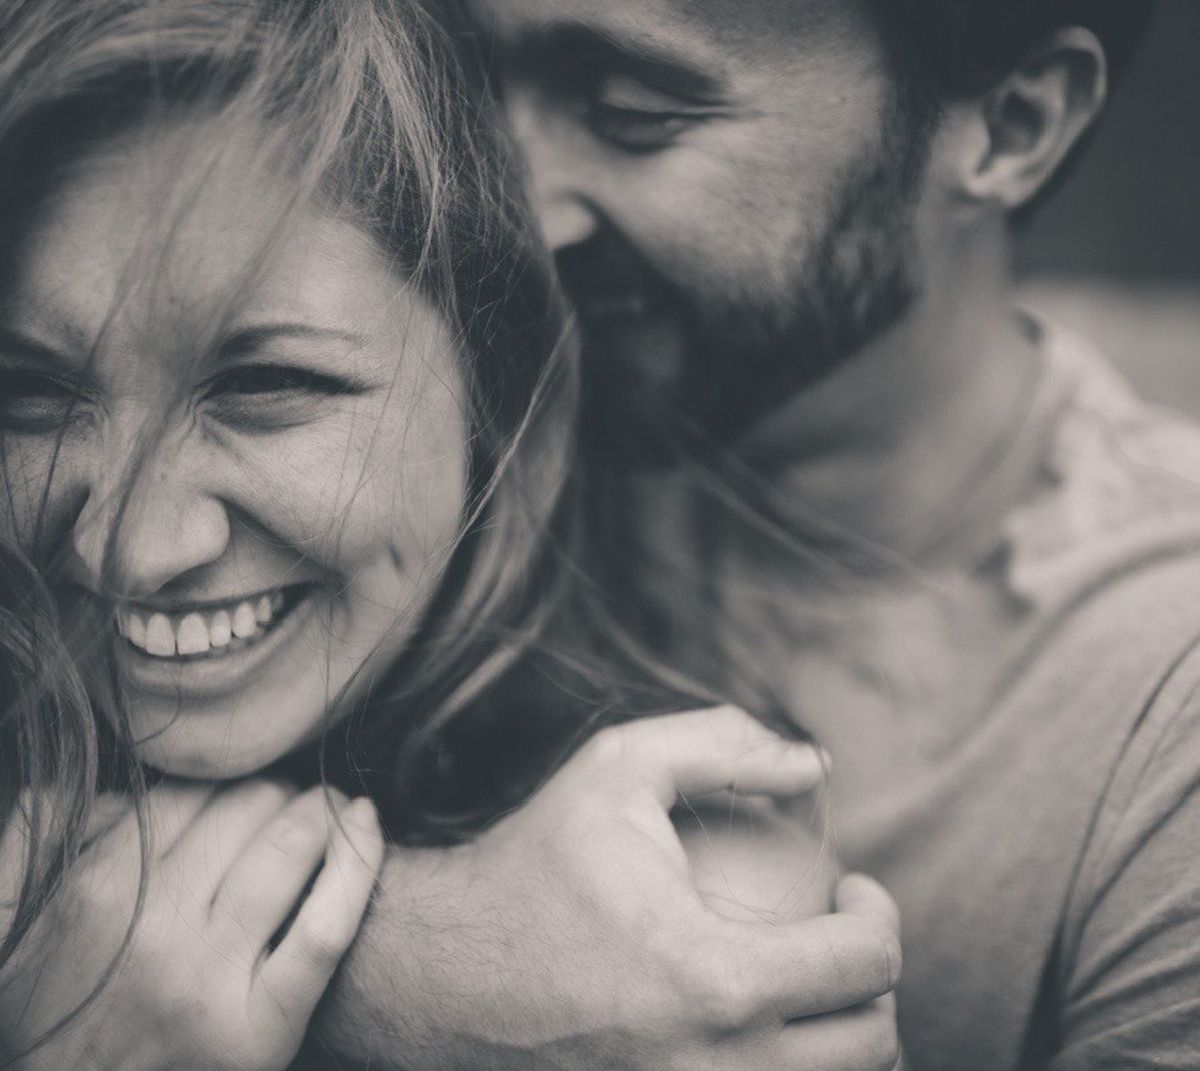 6 Ways To Know You've Found Your "One"